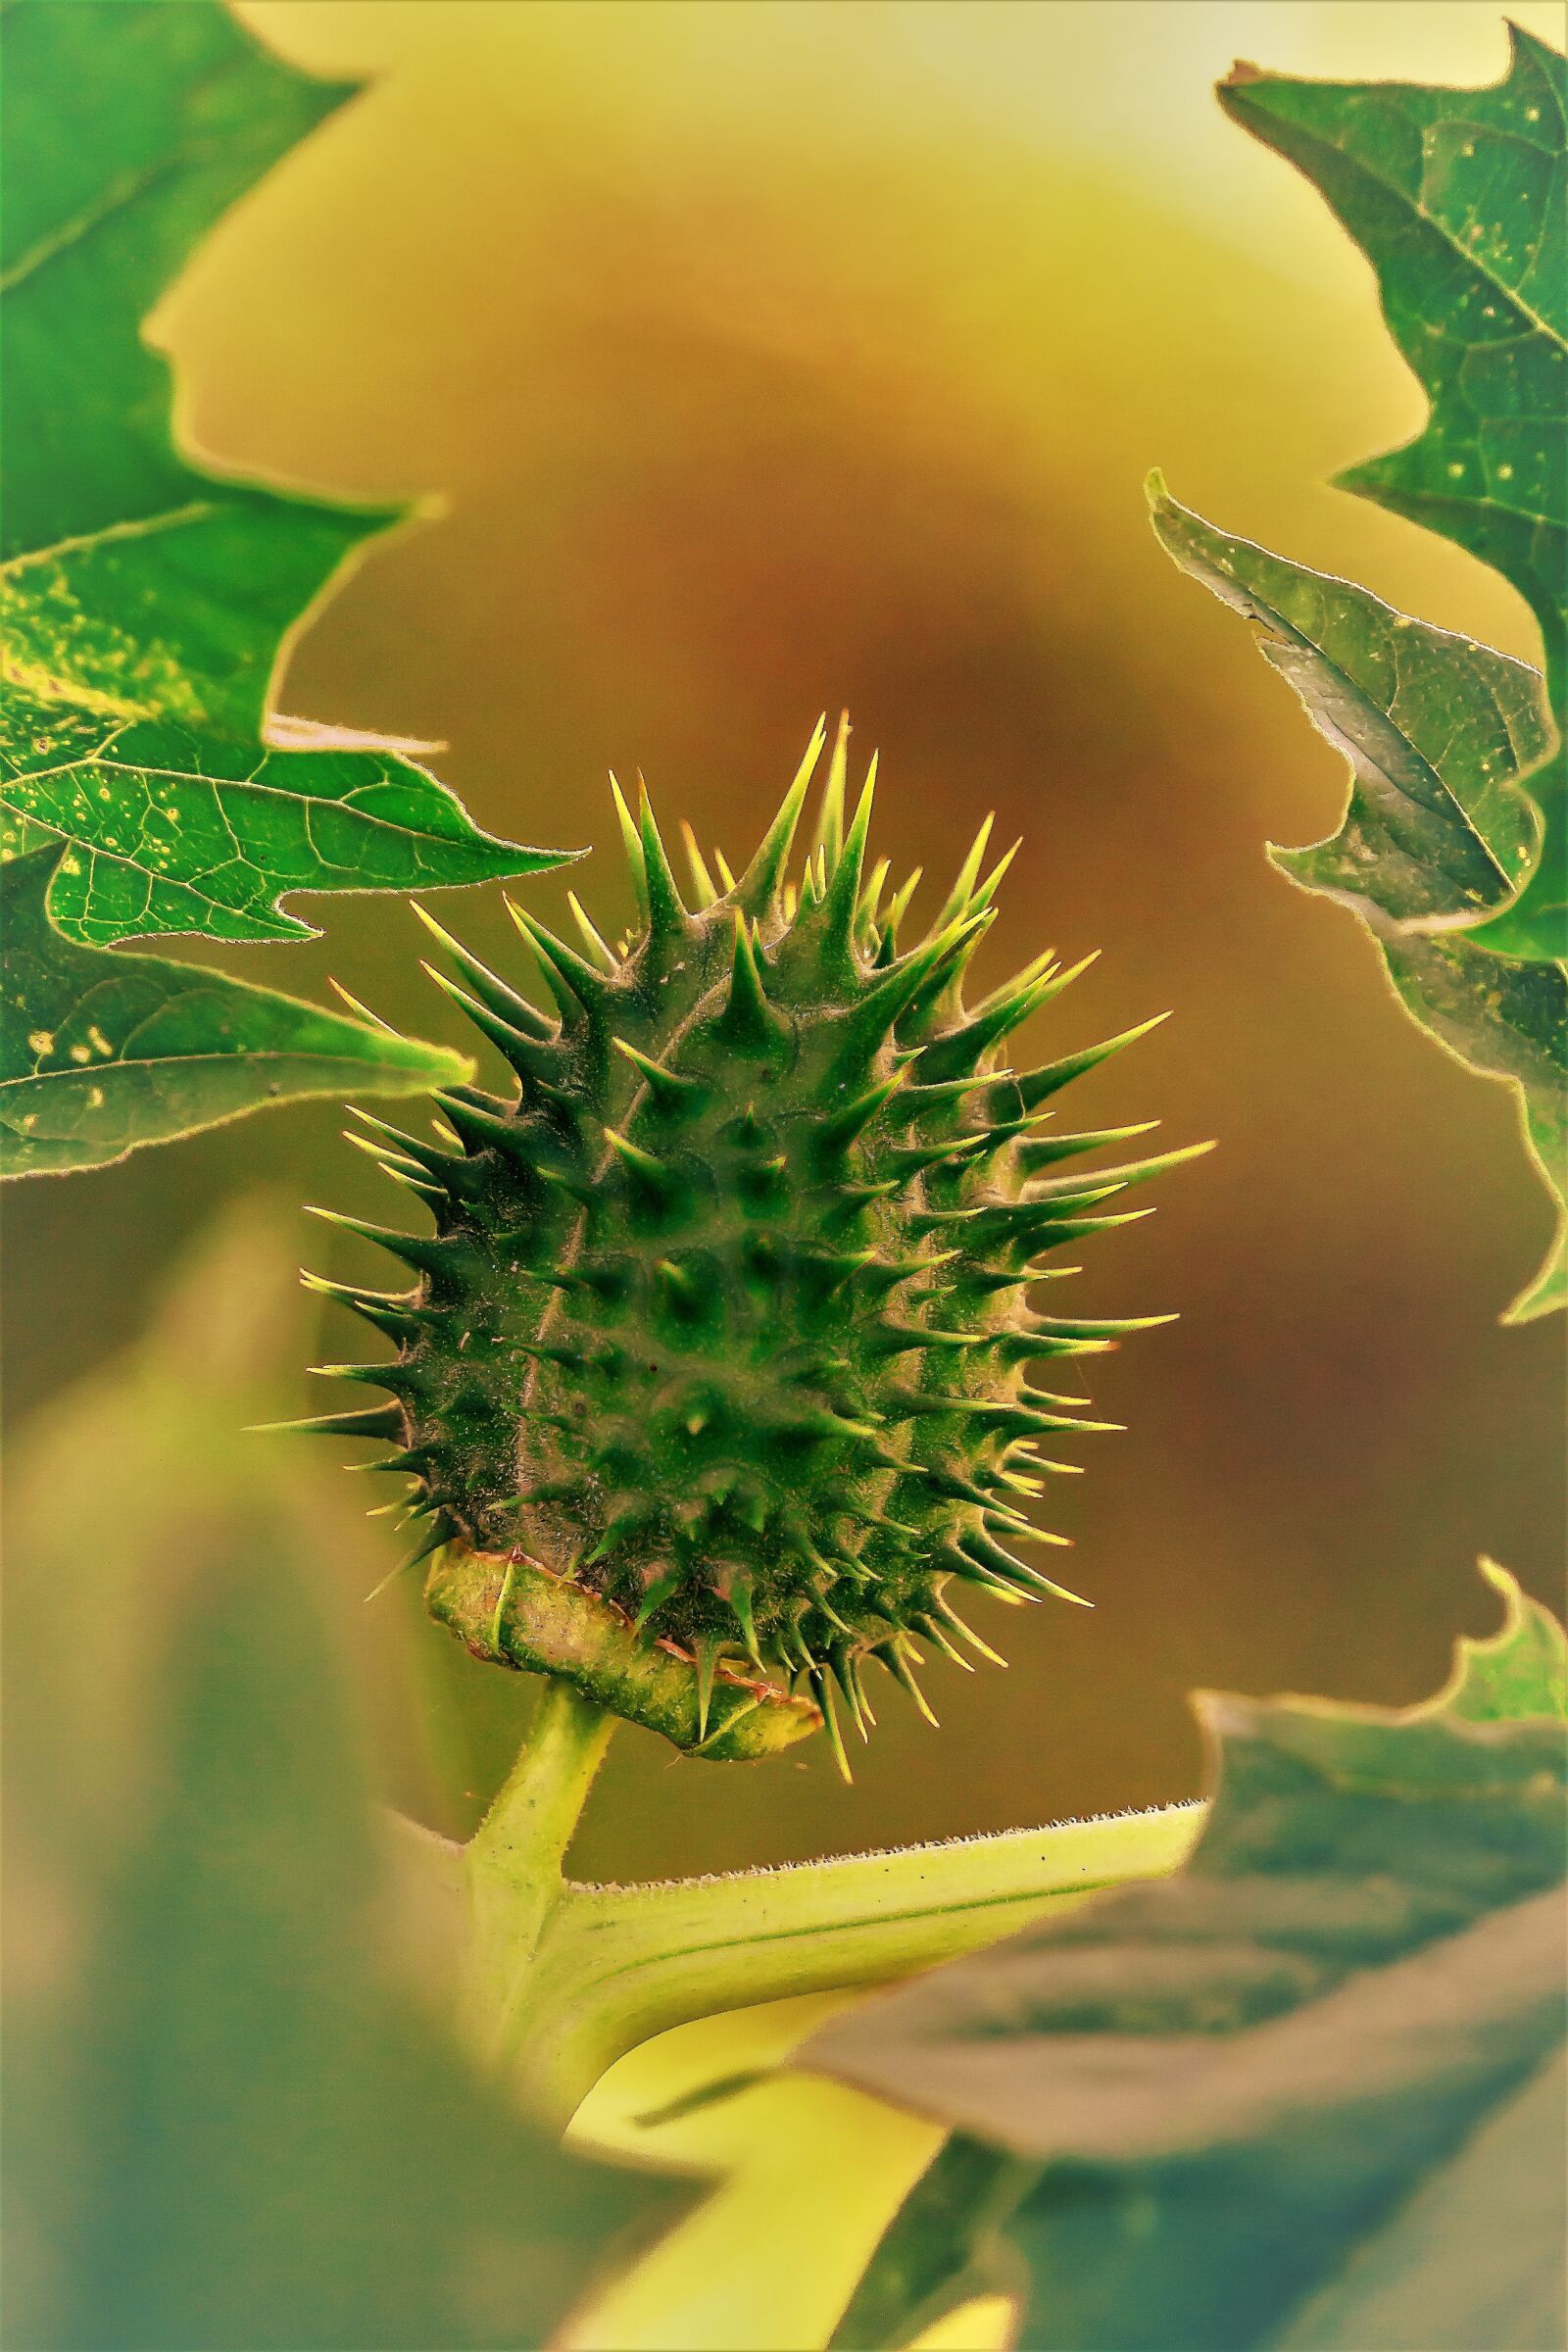 Sony a6000 sample photo. Thorn apple, green, plant photography